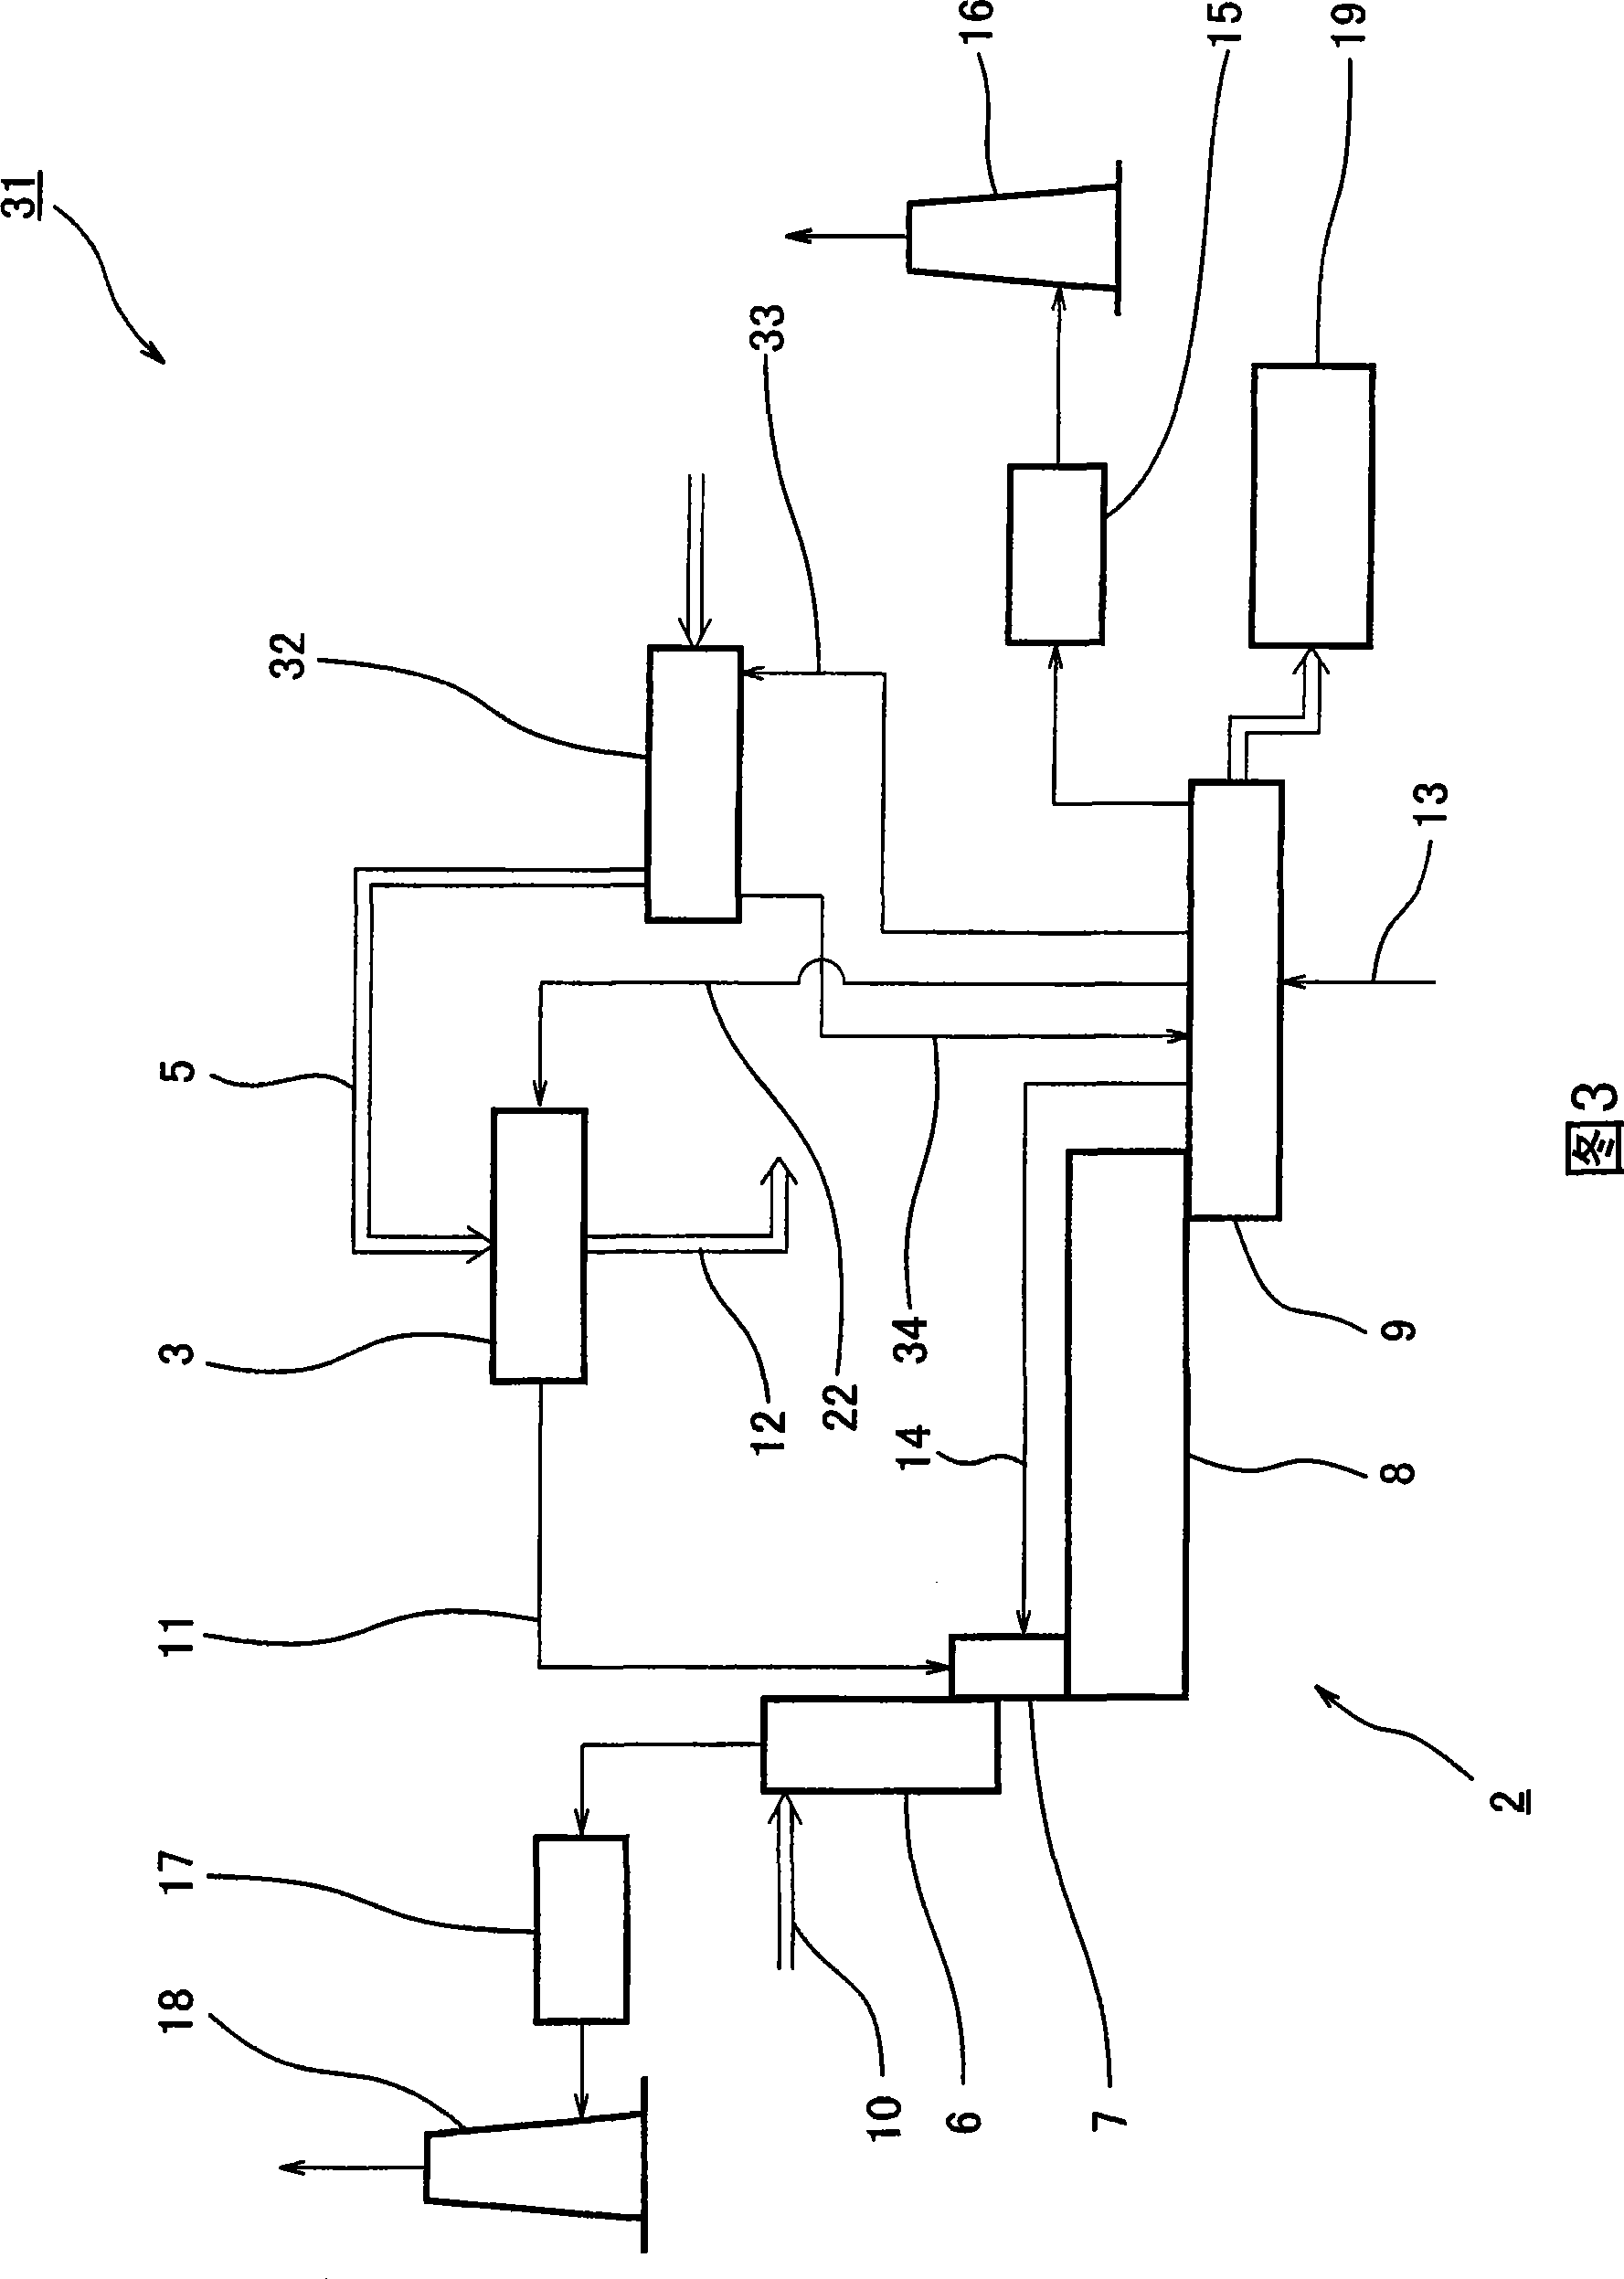 Apparatus and method for processing wastes